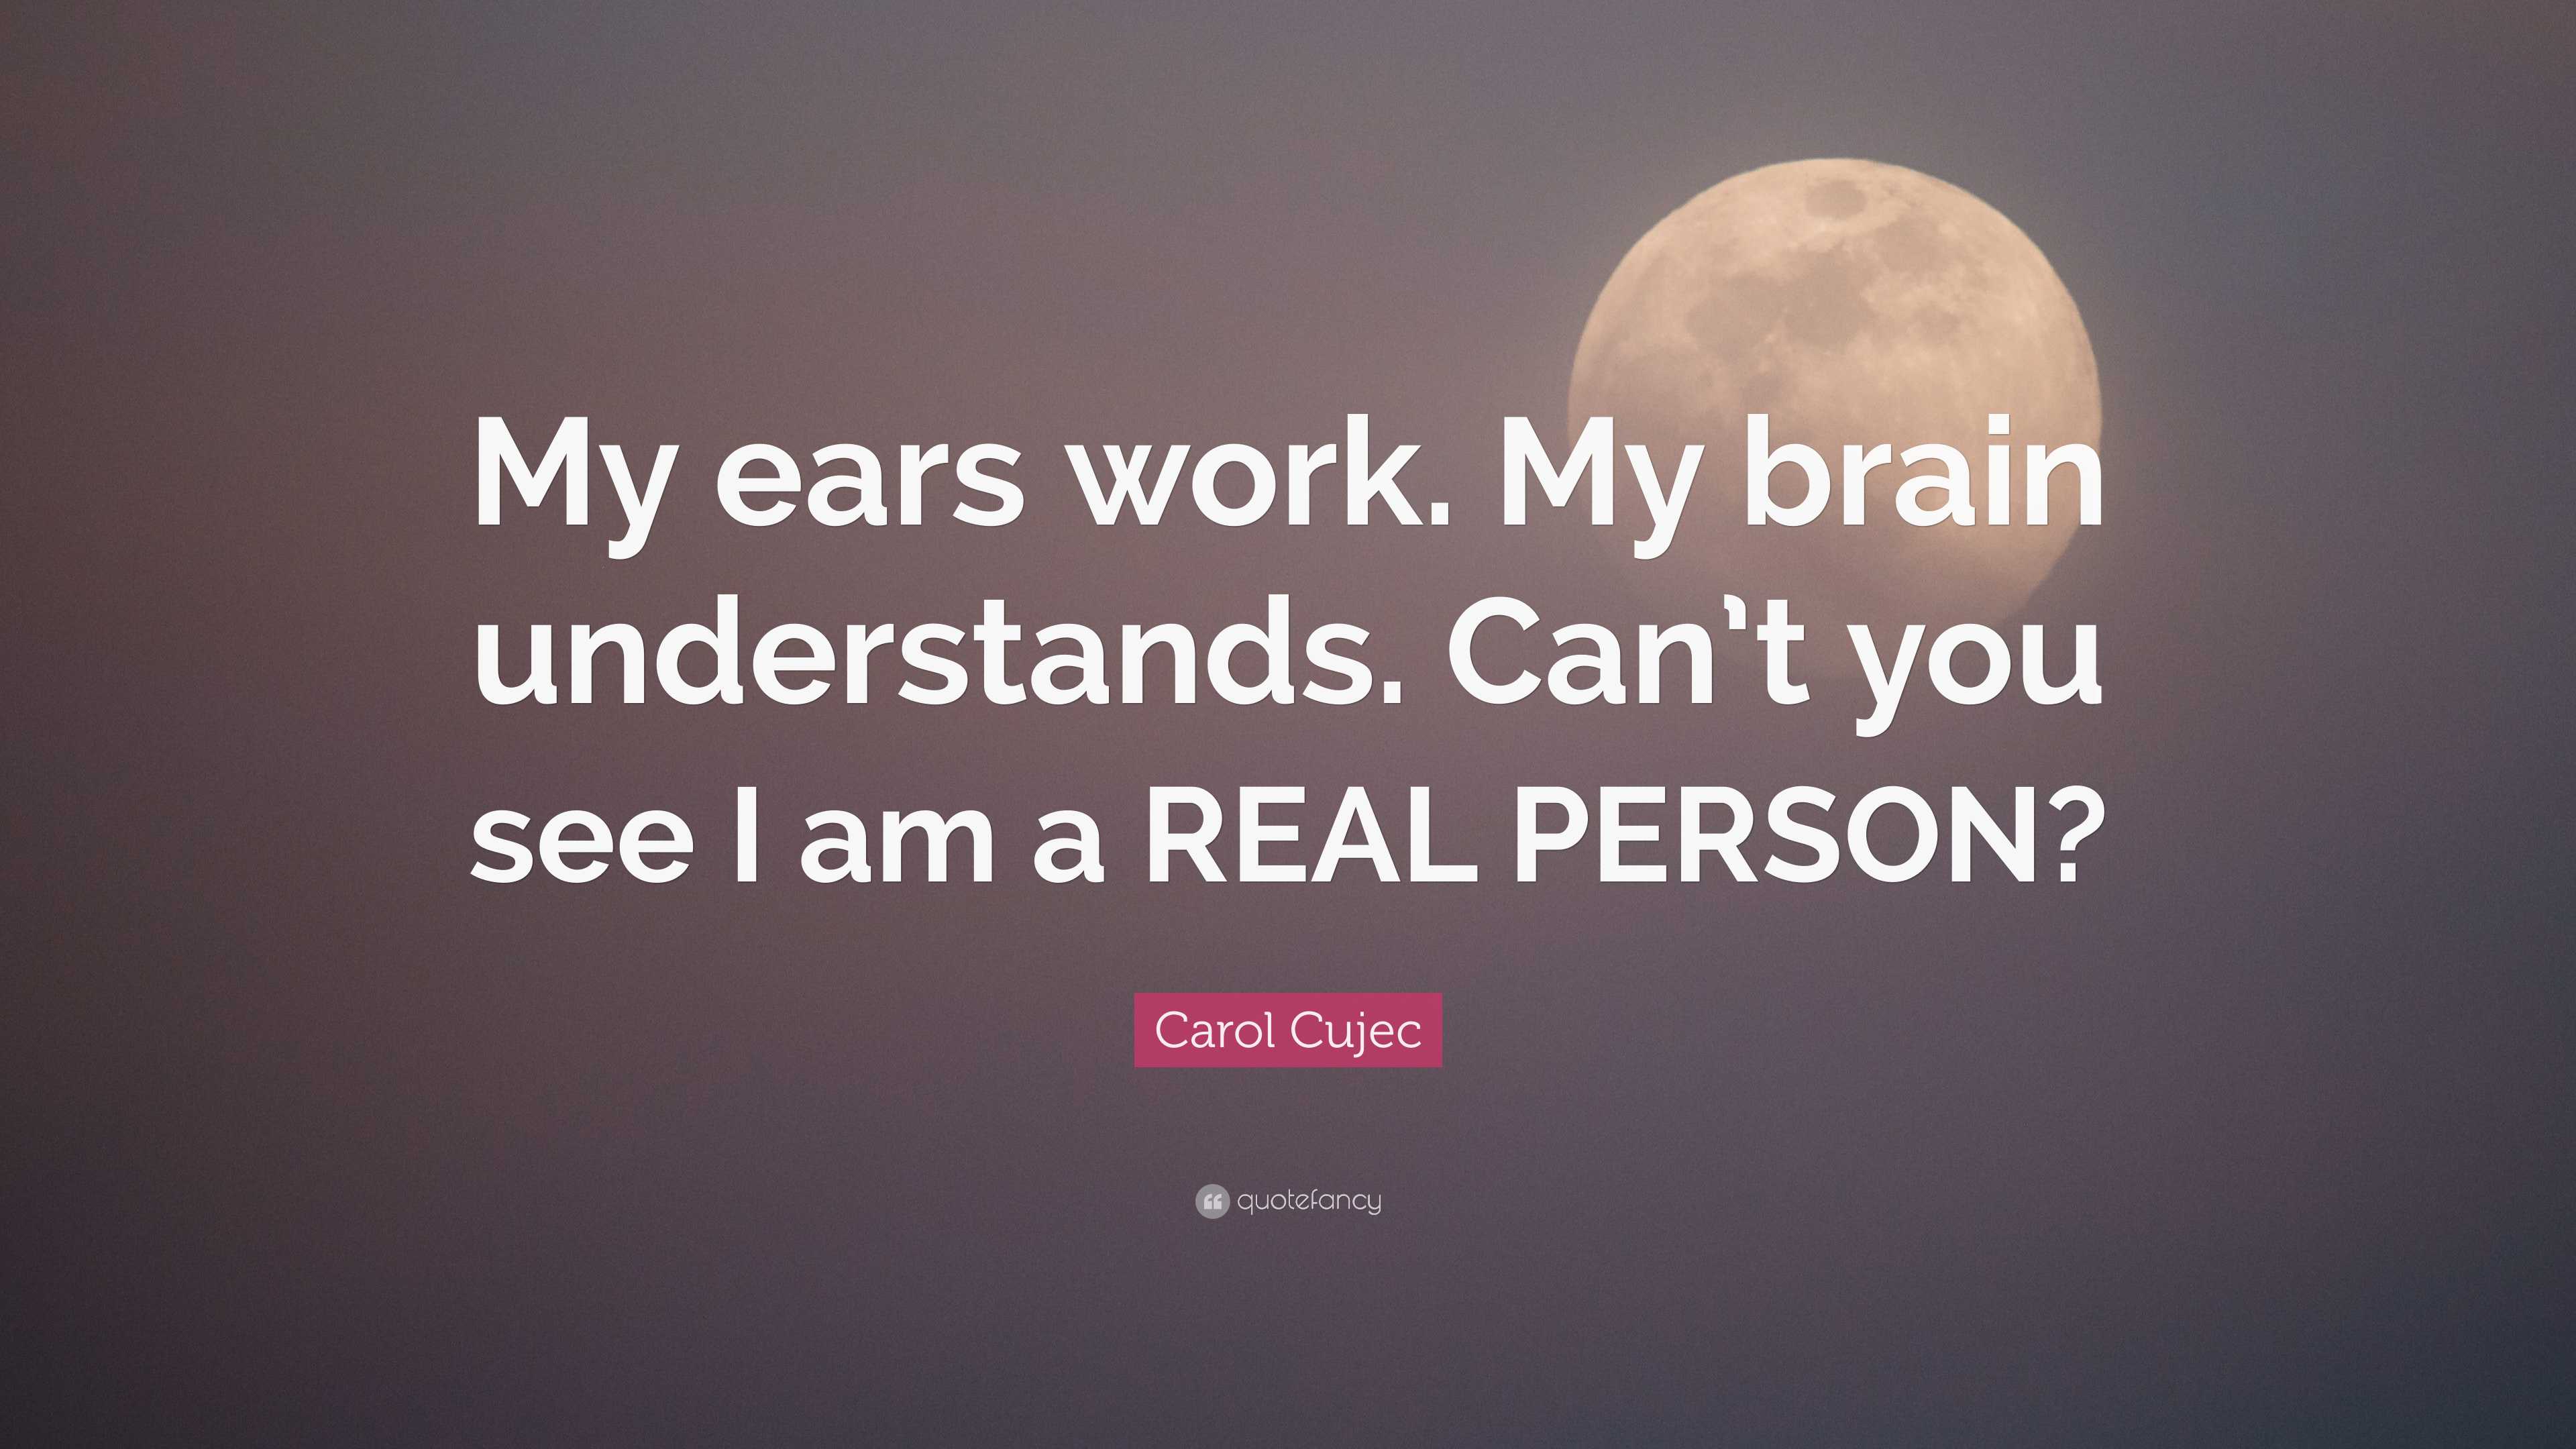 Carol Cujec Quote: “My ears work. My brain understands. Can't you see I am a